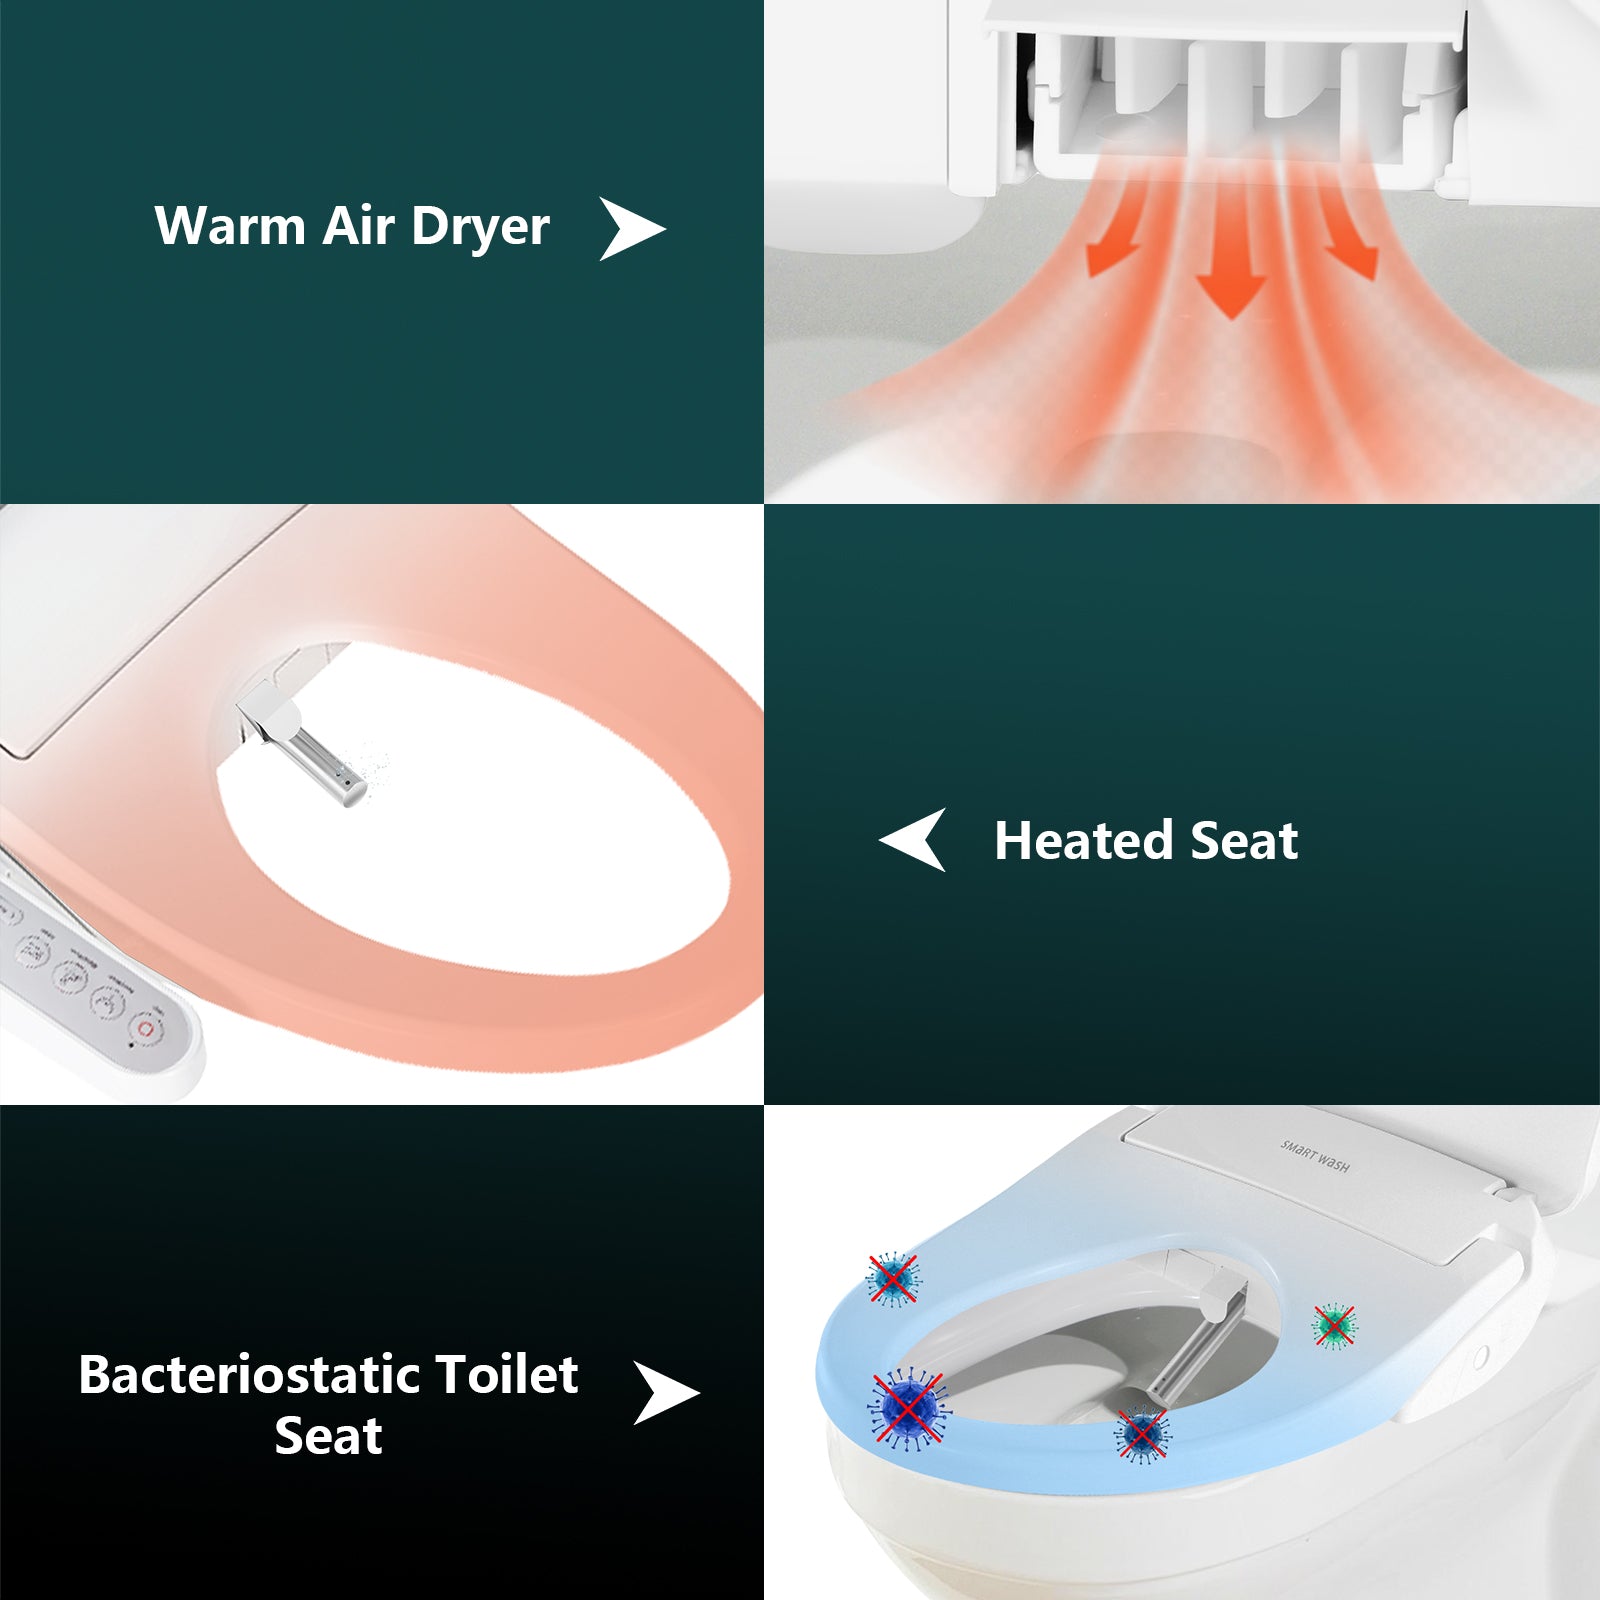 Smart Heated Bidet Toilet Seat with Self-Cleaning Nozzle, Warm Air Dryer and Temperature Controlled